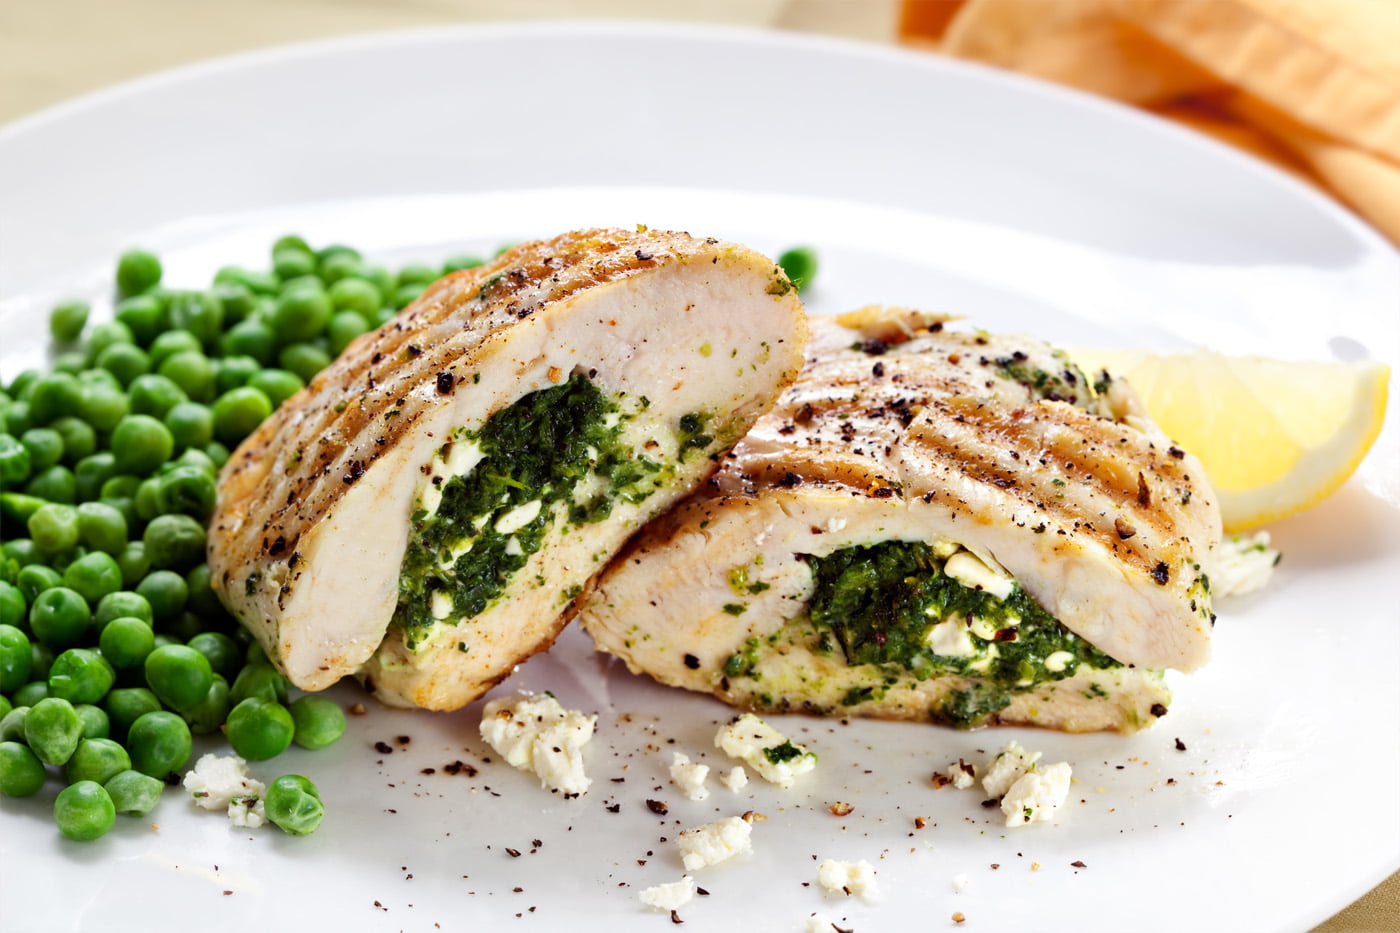 500 Calories or Less: Spicy Stuffed Chicken Breast With Rice